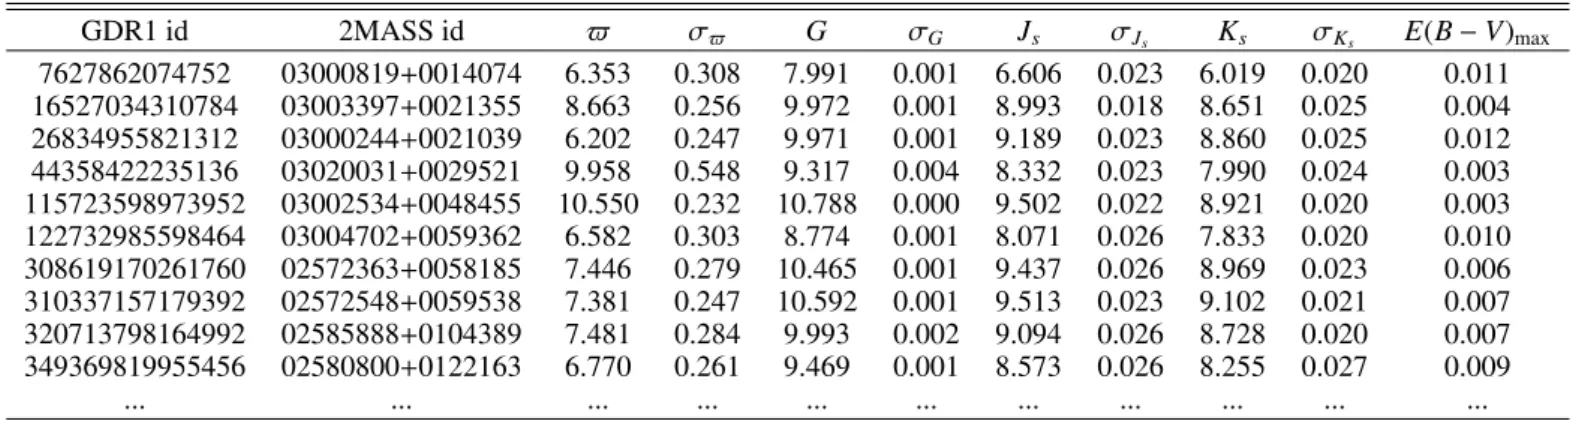 Table A.1 contains a few rows of the low extinction TGAS HRD compilation used in this work